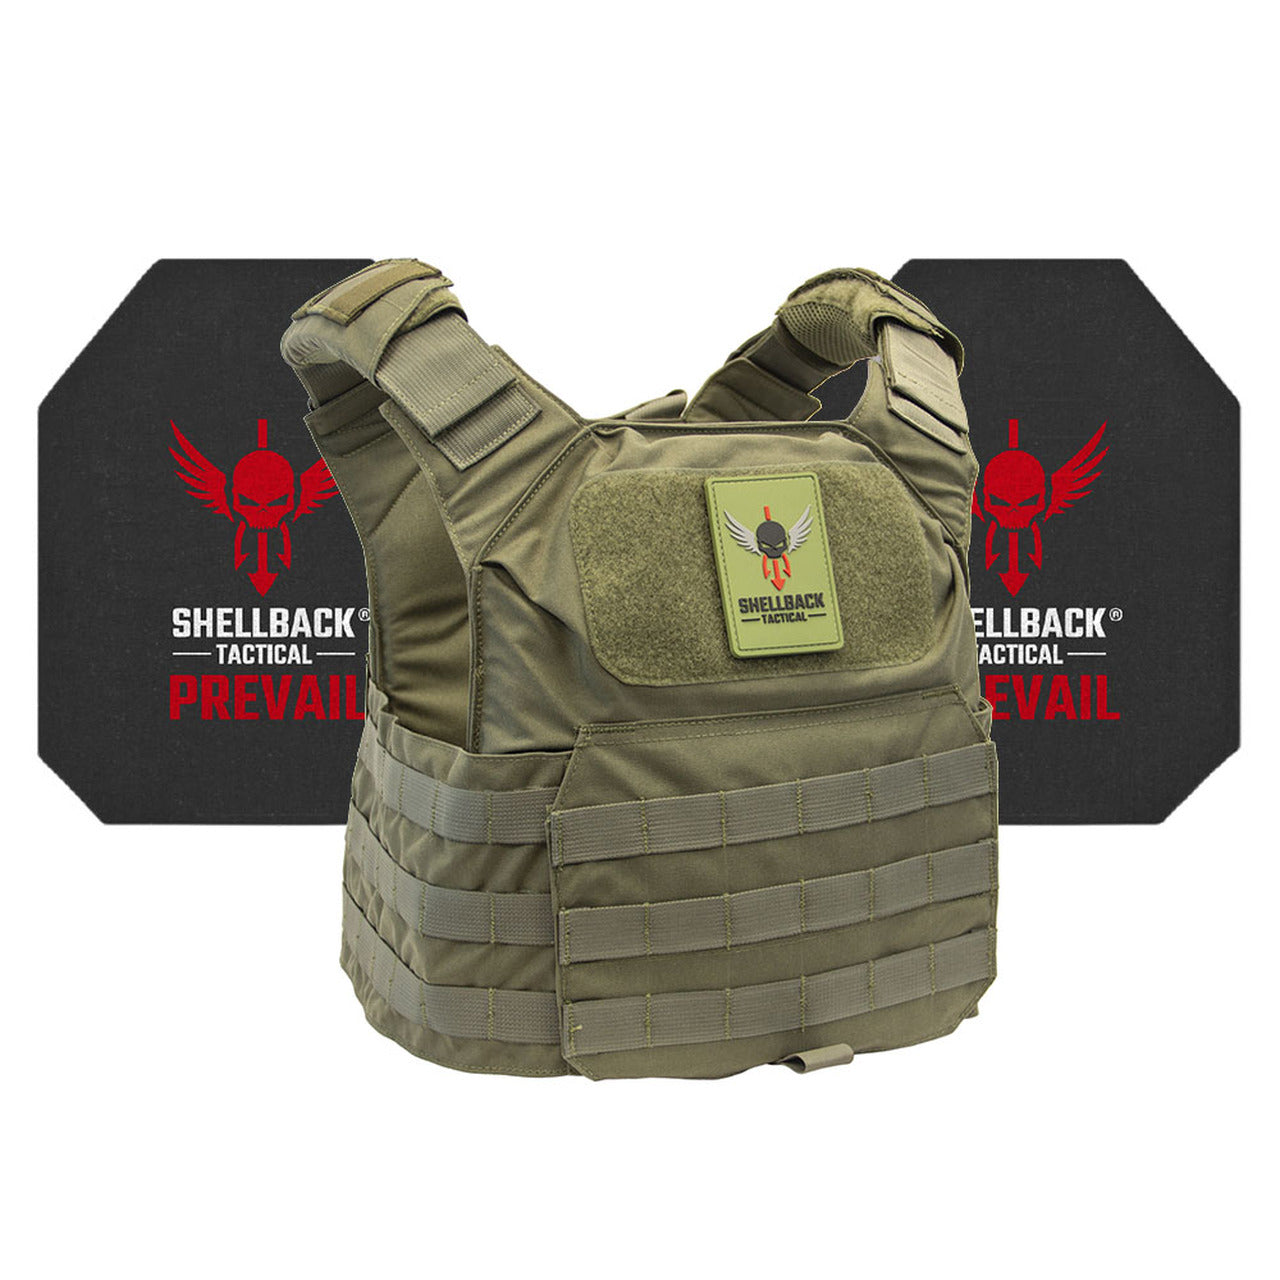 A Shellback Tactical Patriot Active Shooter Kit with Level IV Model 4S17 Armor Plates Ranger Green vest with a holster on it.